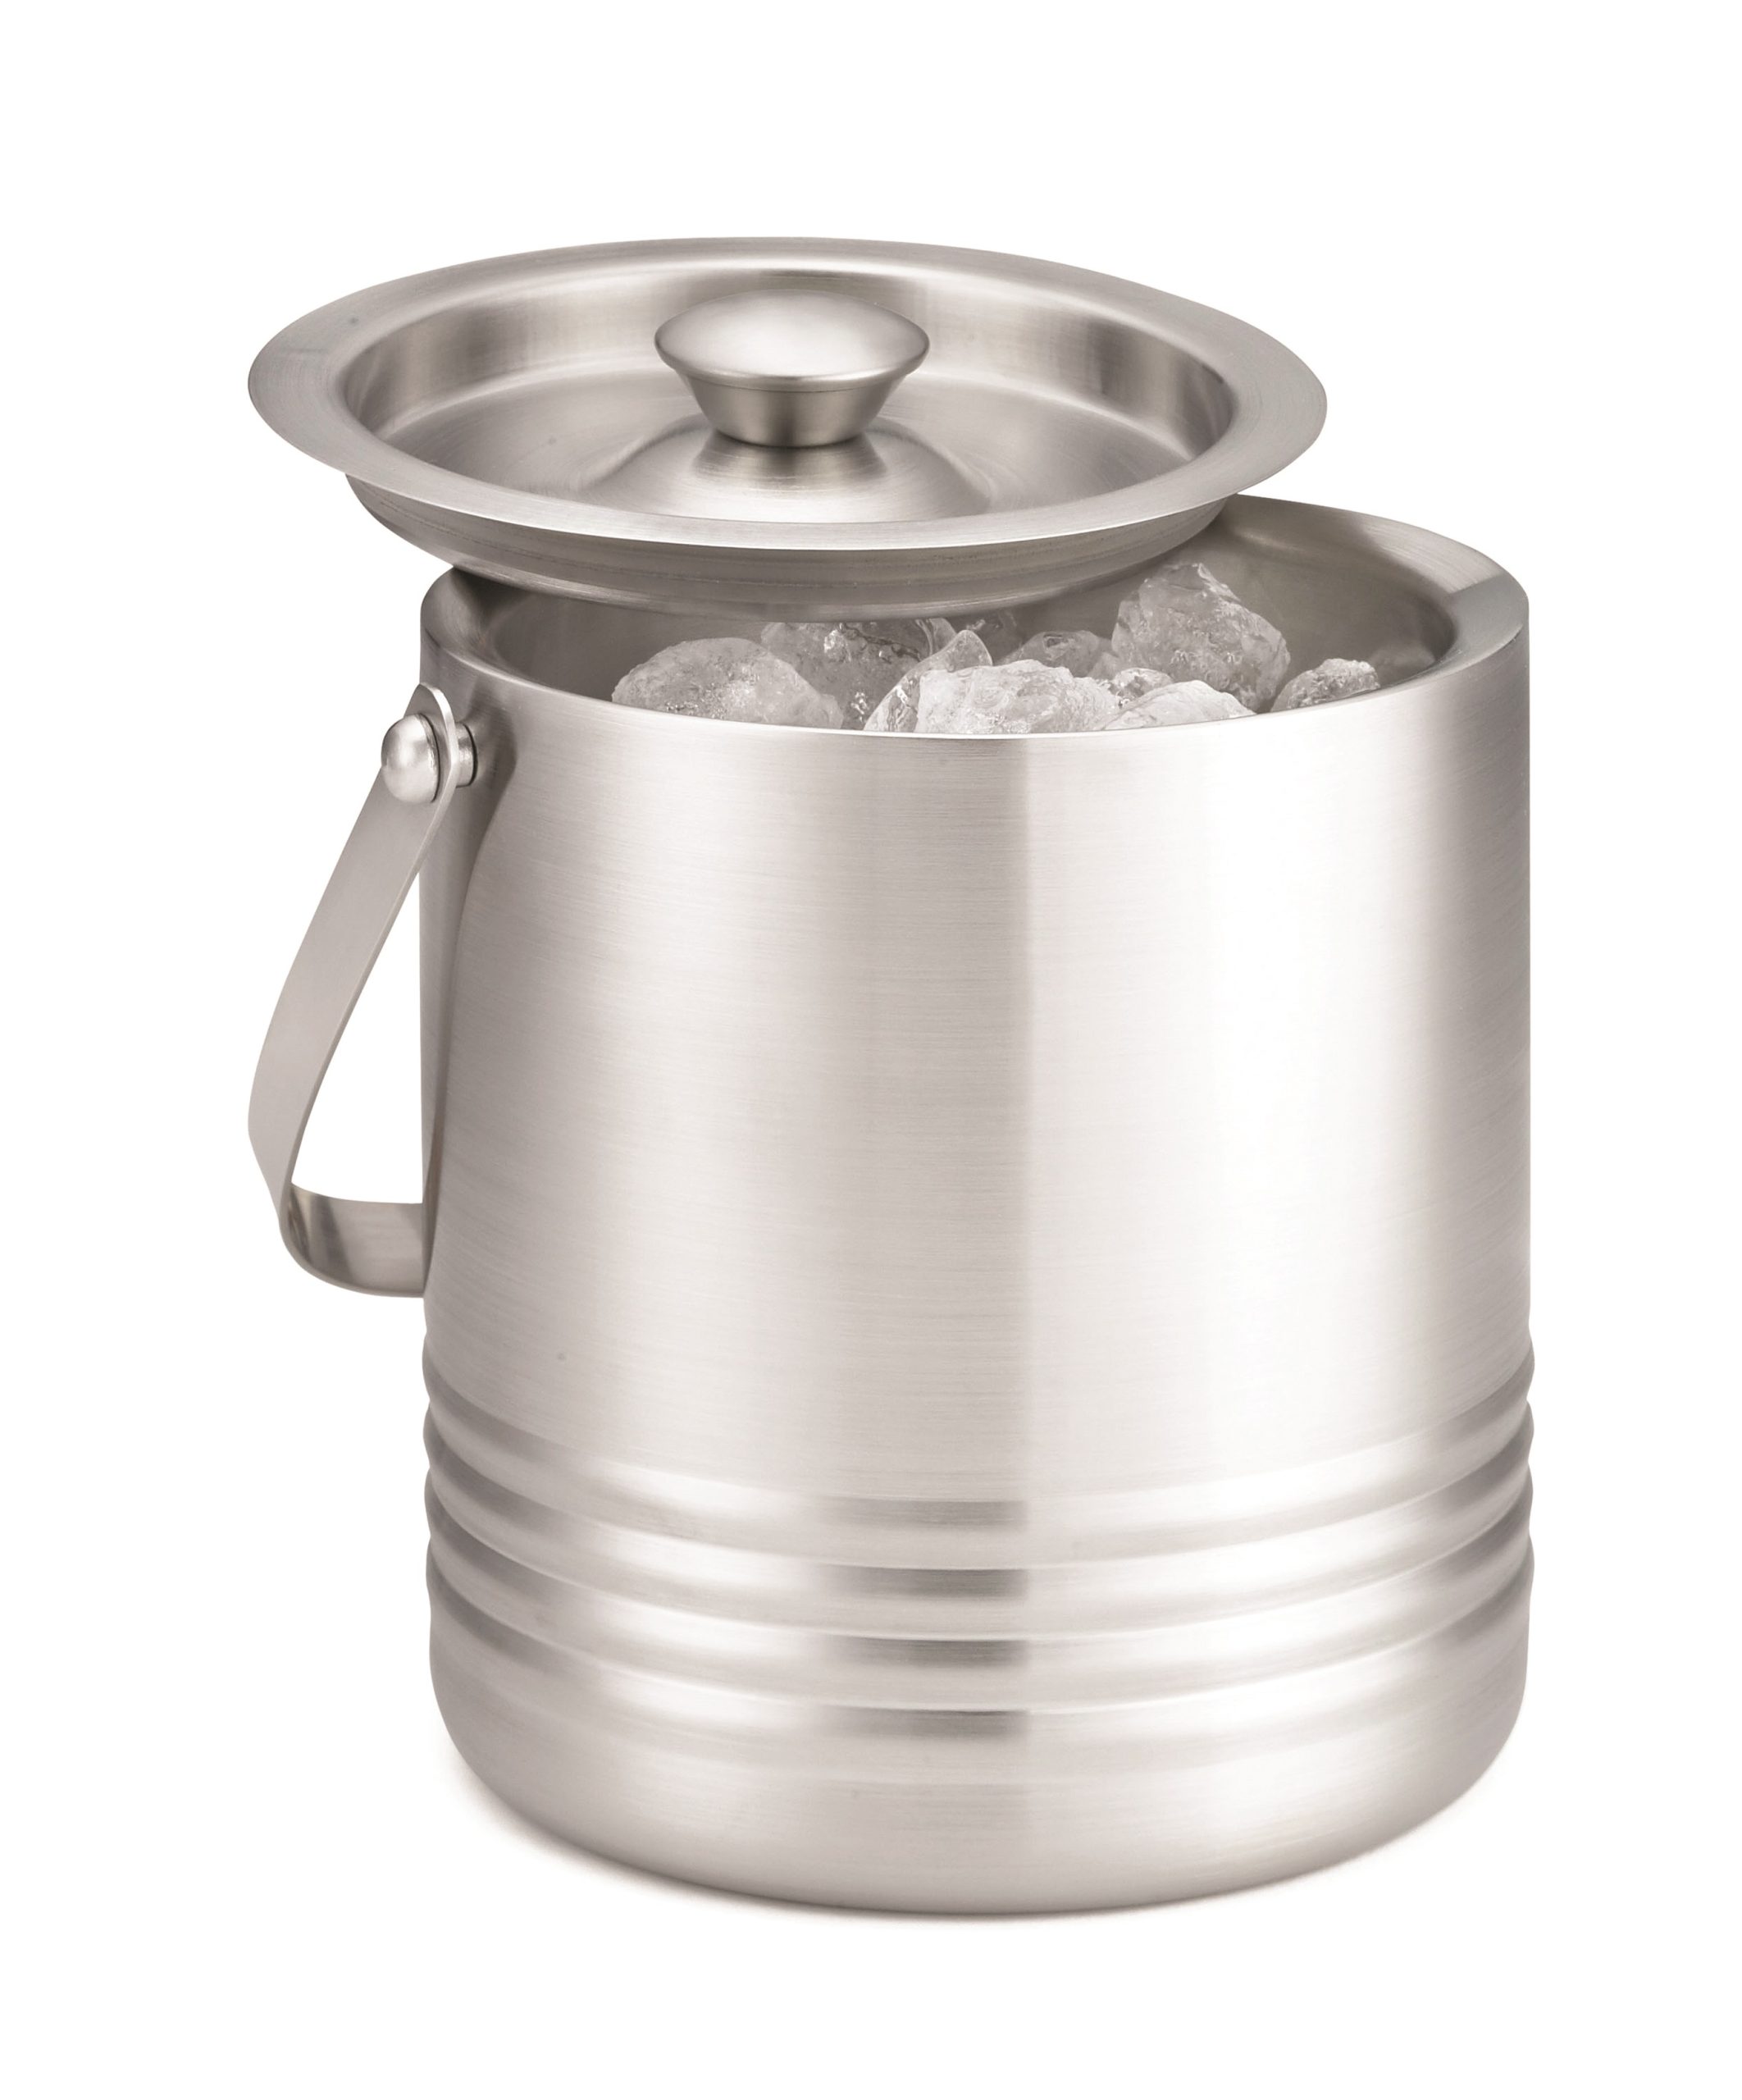 RIB76 DOUBLE WALL ROOM SERVICE ICE BUCKET STAINLESS STEEL TABLECRAFT